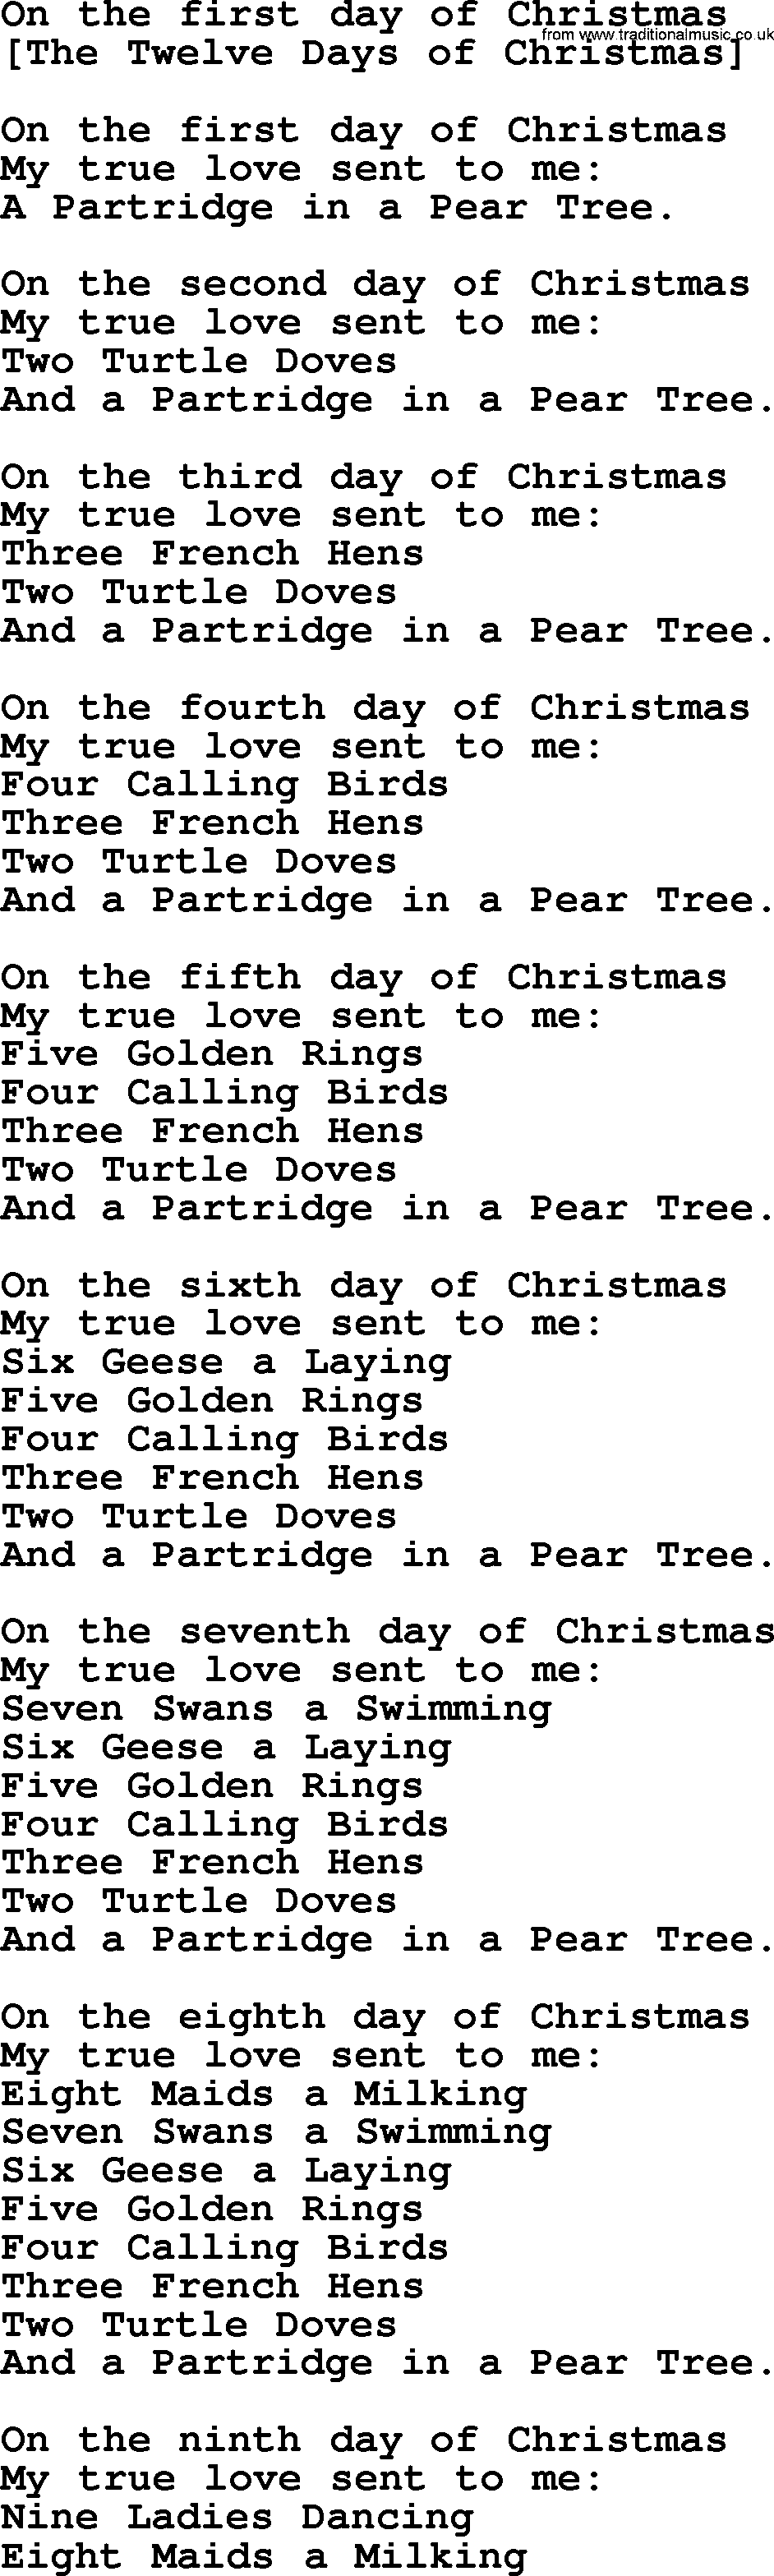 Old English Song: On The First Day Of Christmas lyrics